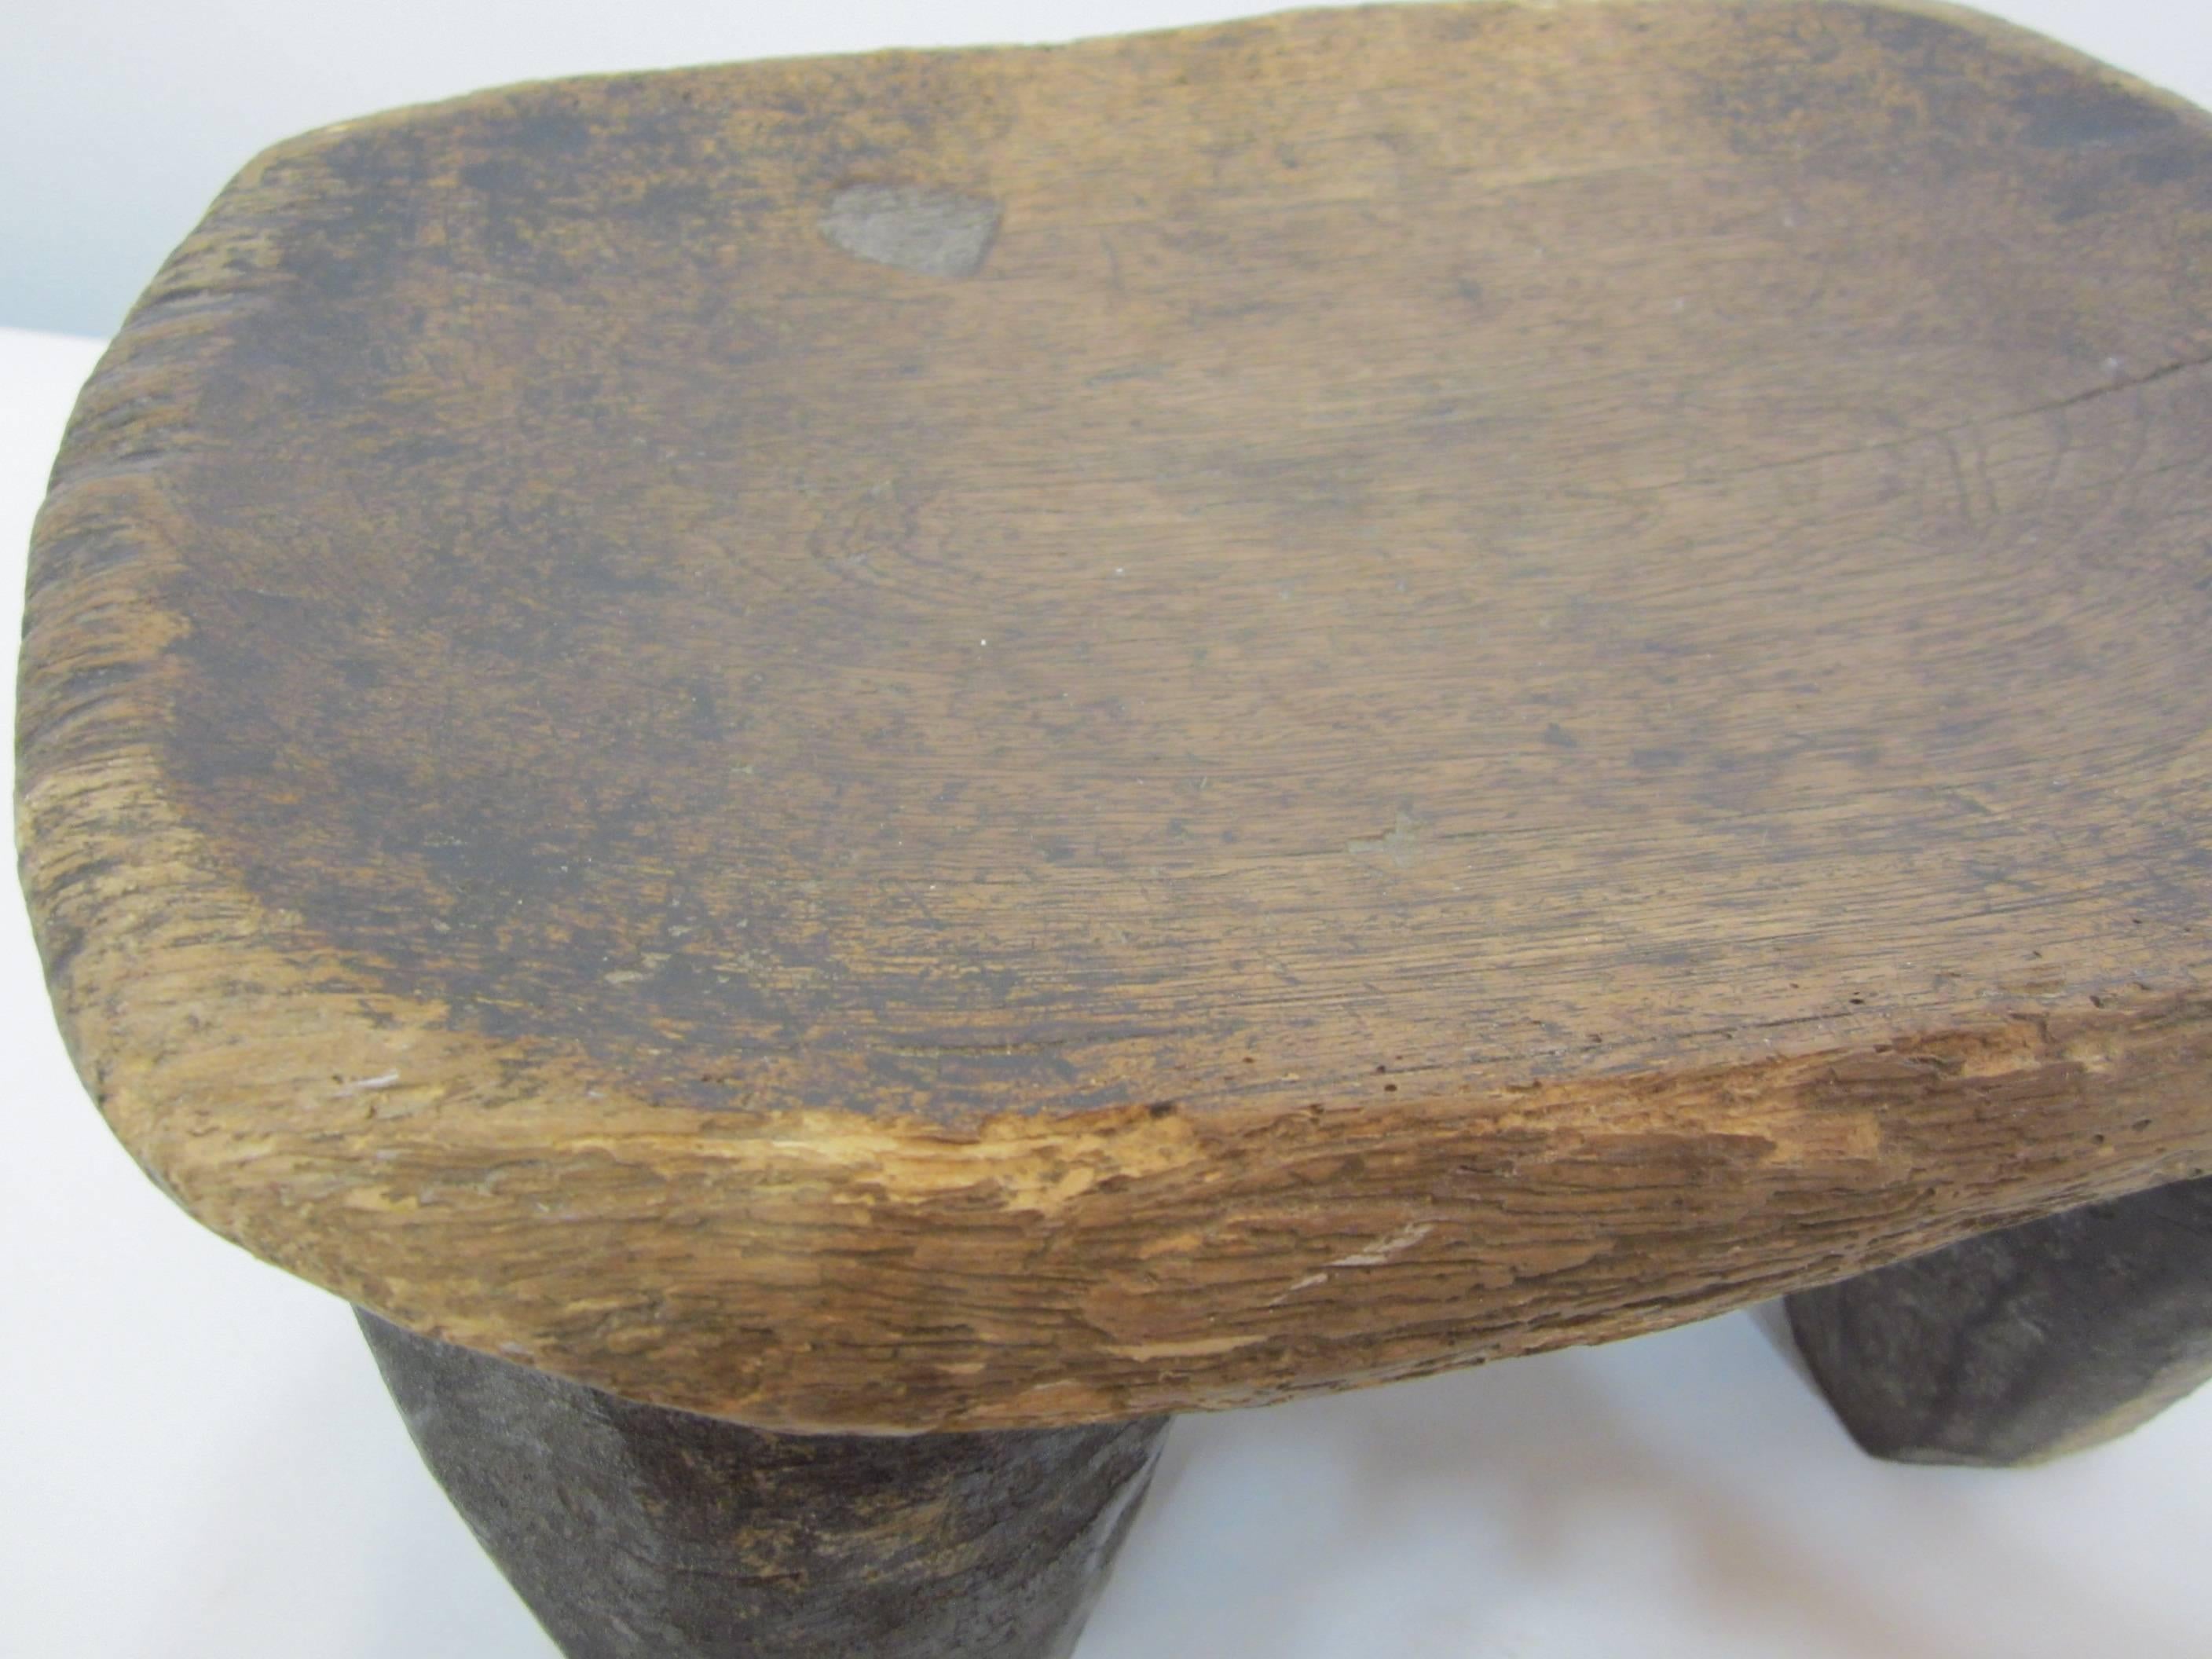 Carved entirely from one one piece of wood, this hand-carved solid wood stool is from the Senufo People in the Cote d'Ivoire, West Africa. A lot of natural patina from age and usage. Solid.